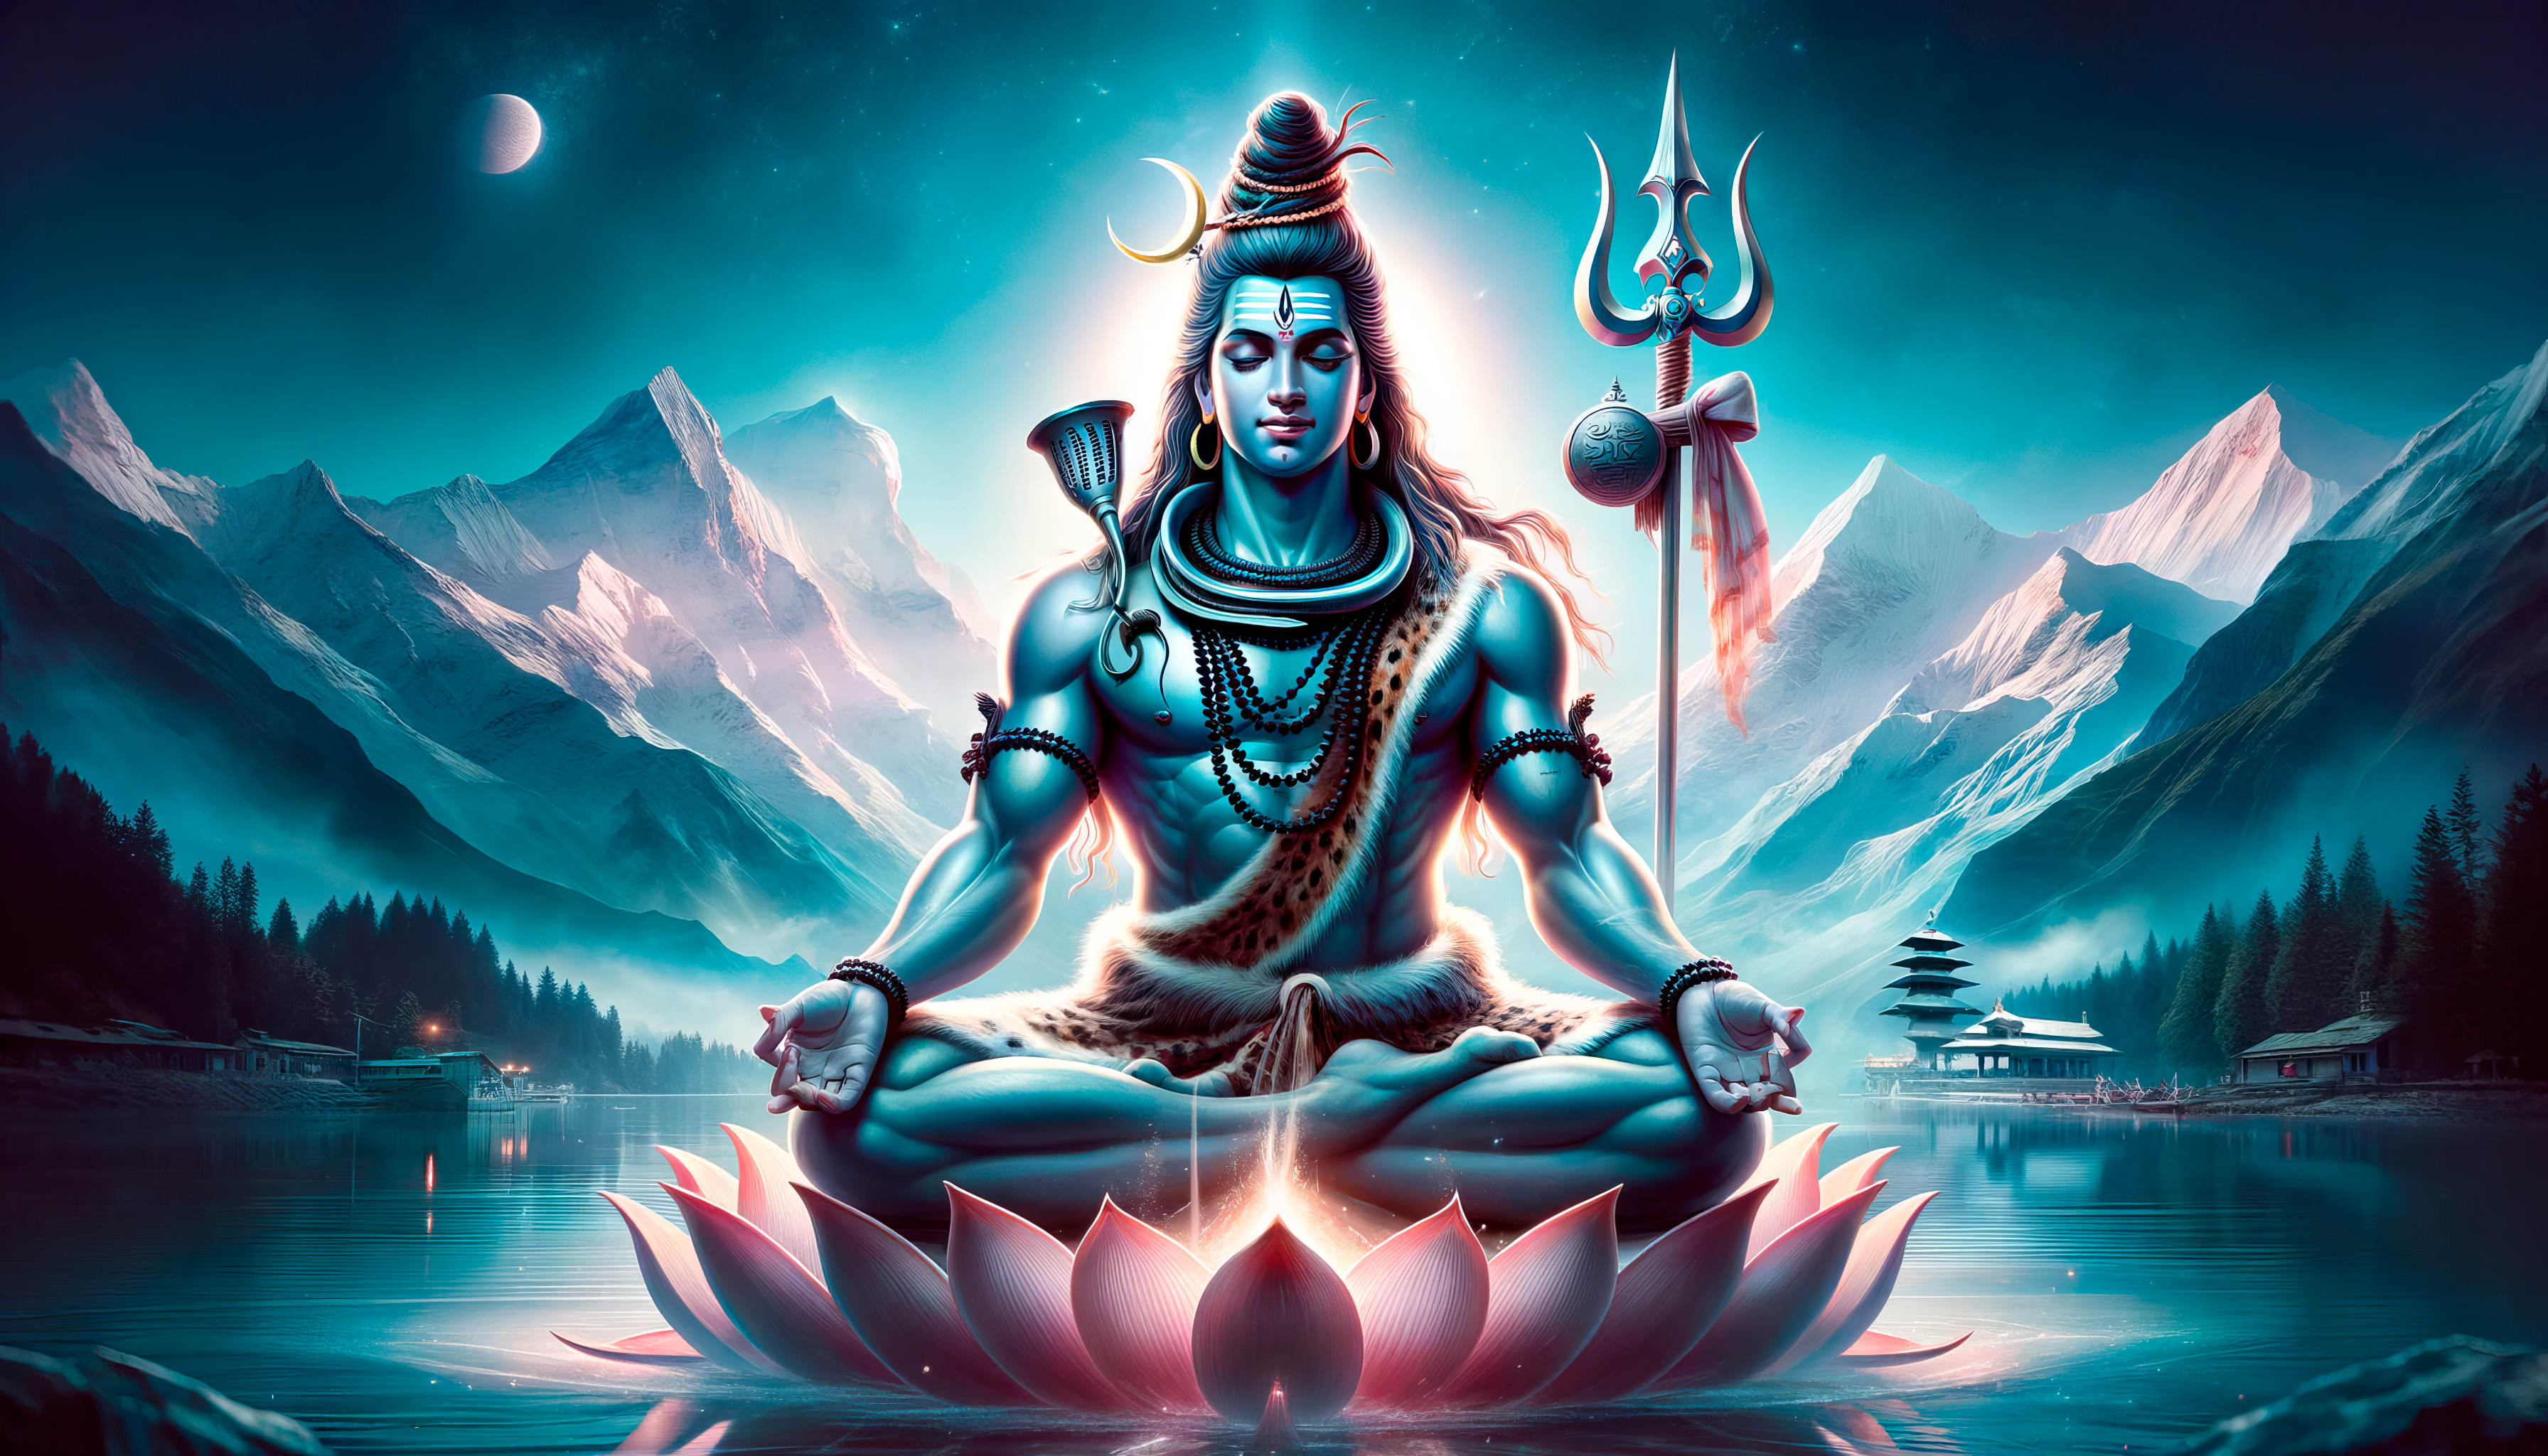 What are some epic and unseen wallpapers of Lord Shiva? - Quora